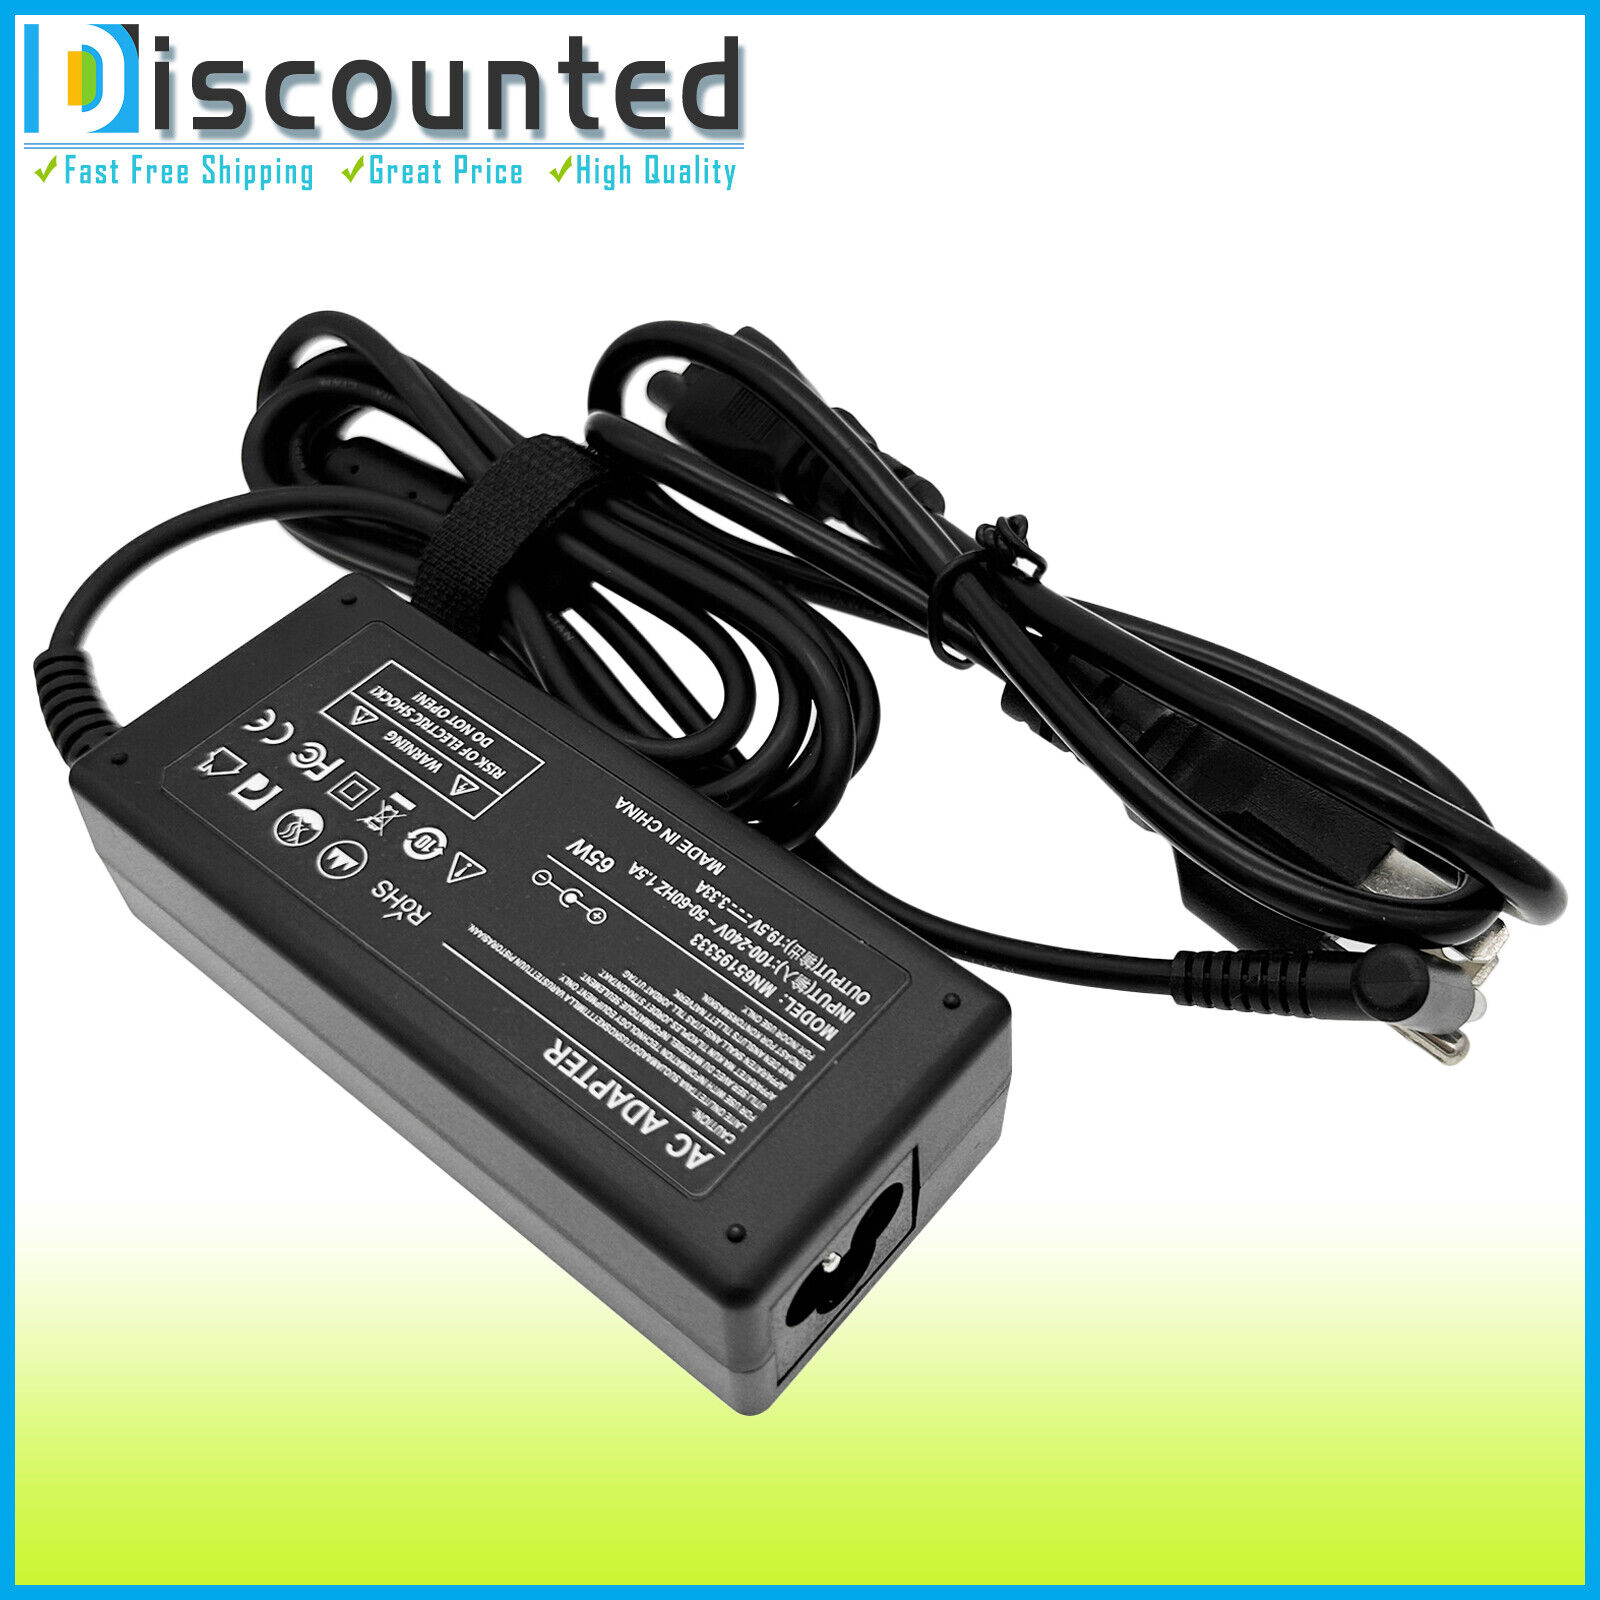 New AC Adapter Charger Power Supply Cord For HP 15-G020dx 15-G029wm Notebook